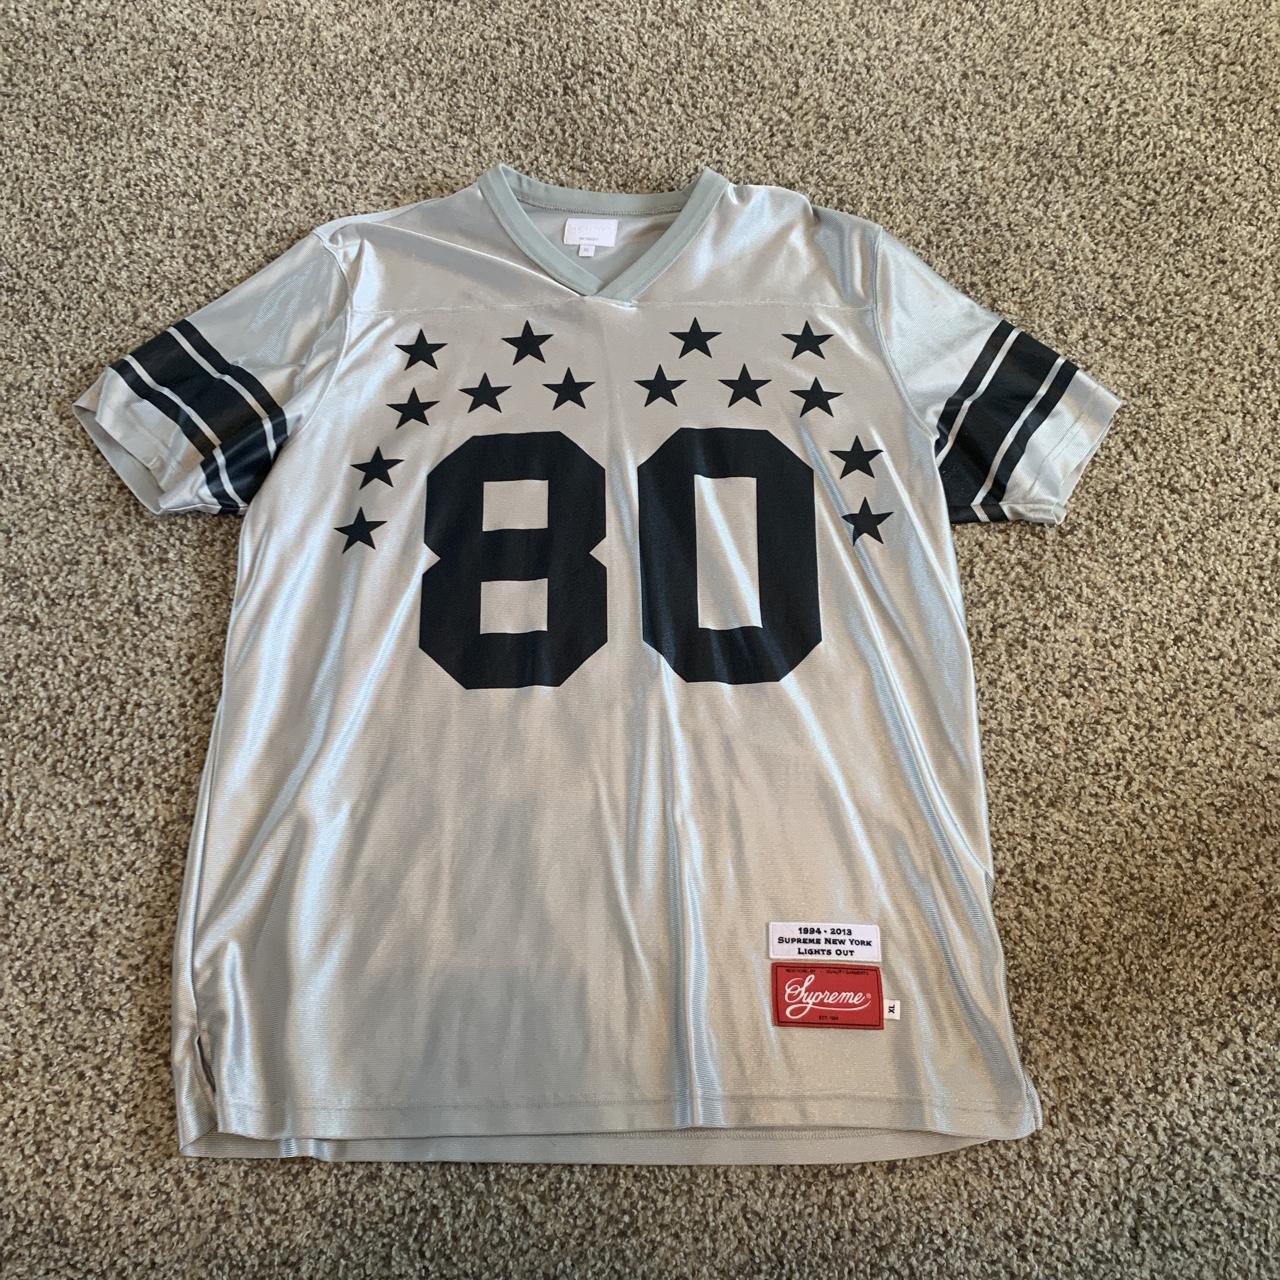 Supreme football jersey from SS13 Size: XL Fits - Depop